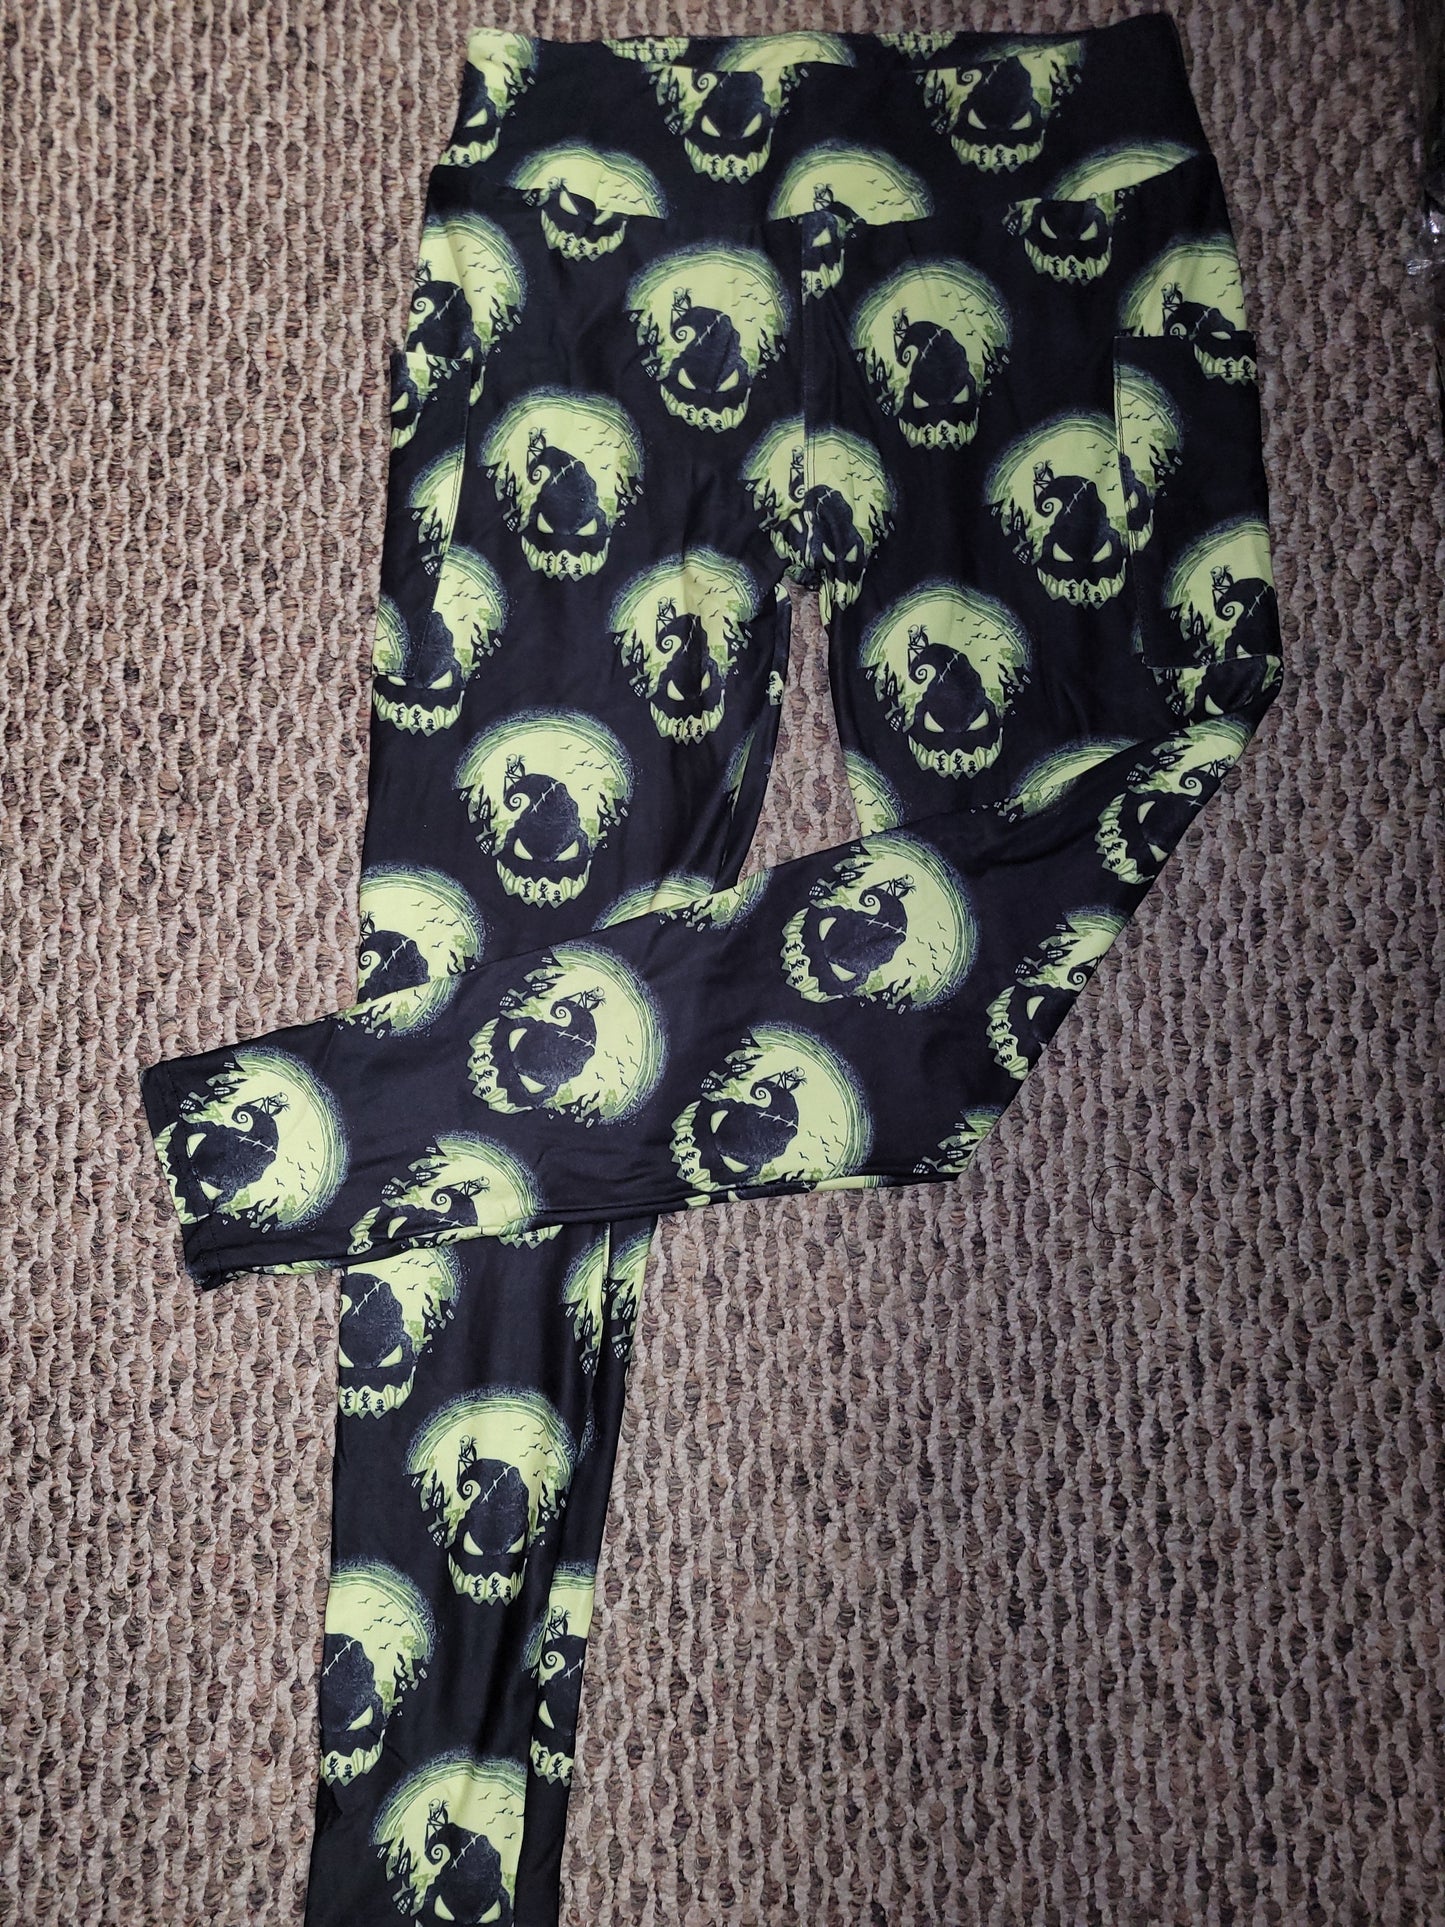 Oogie  Boogie with pockets